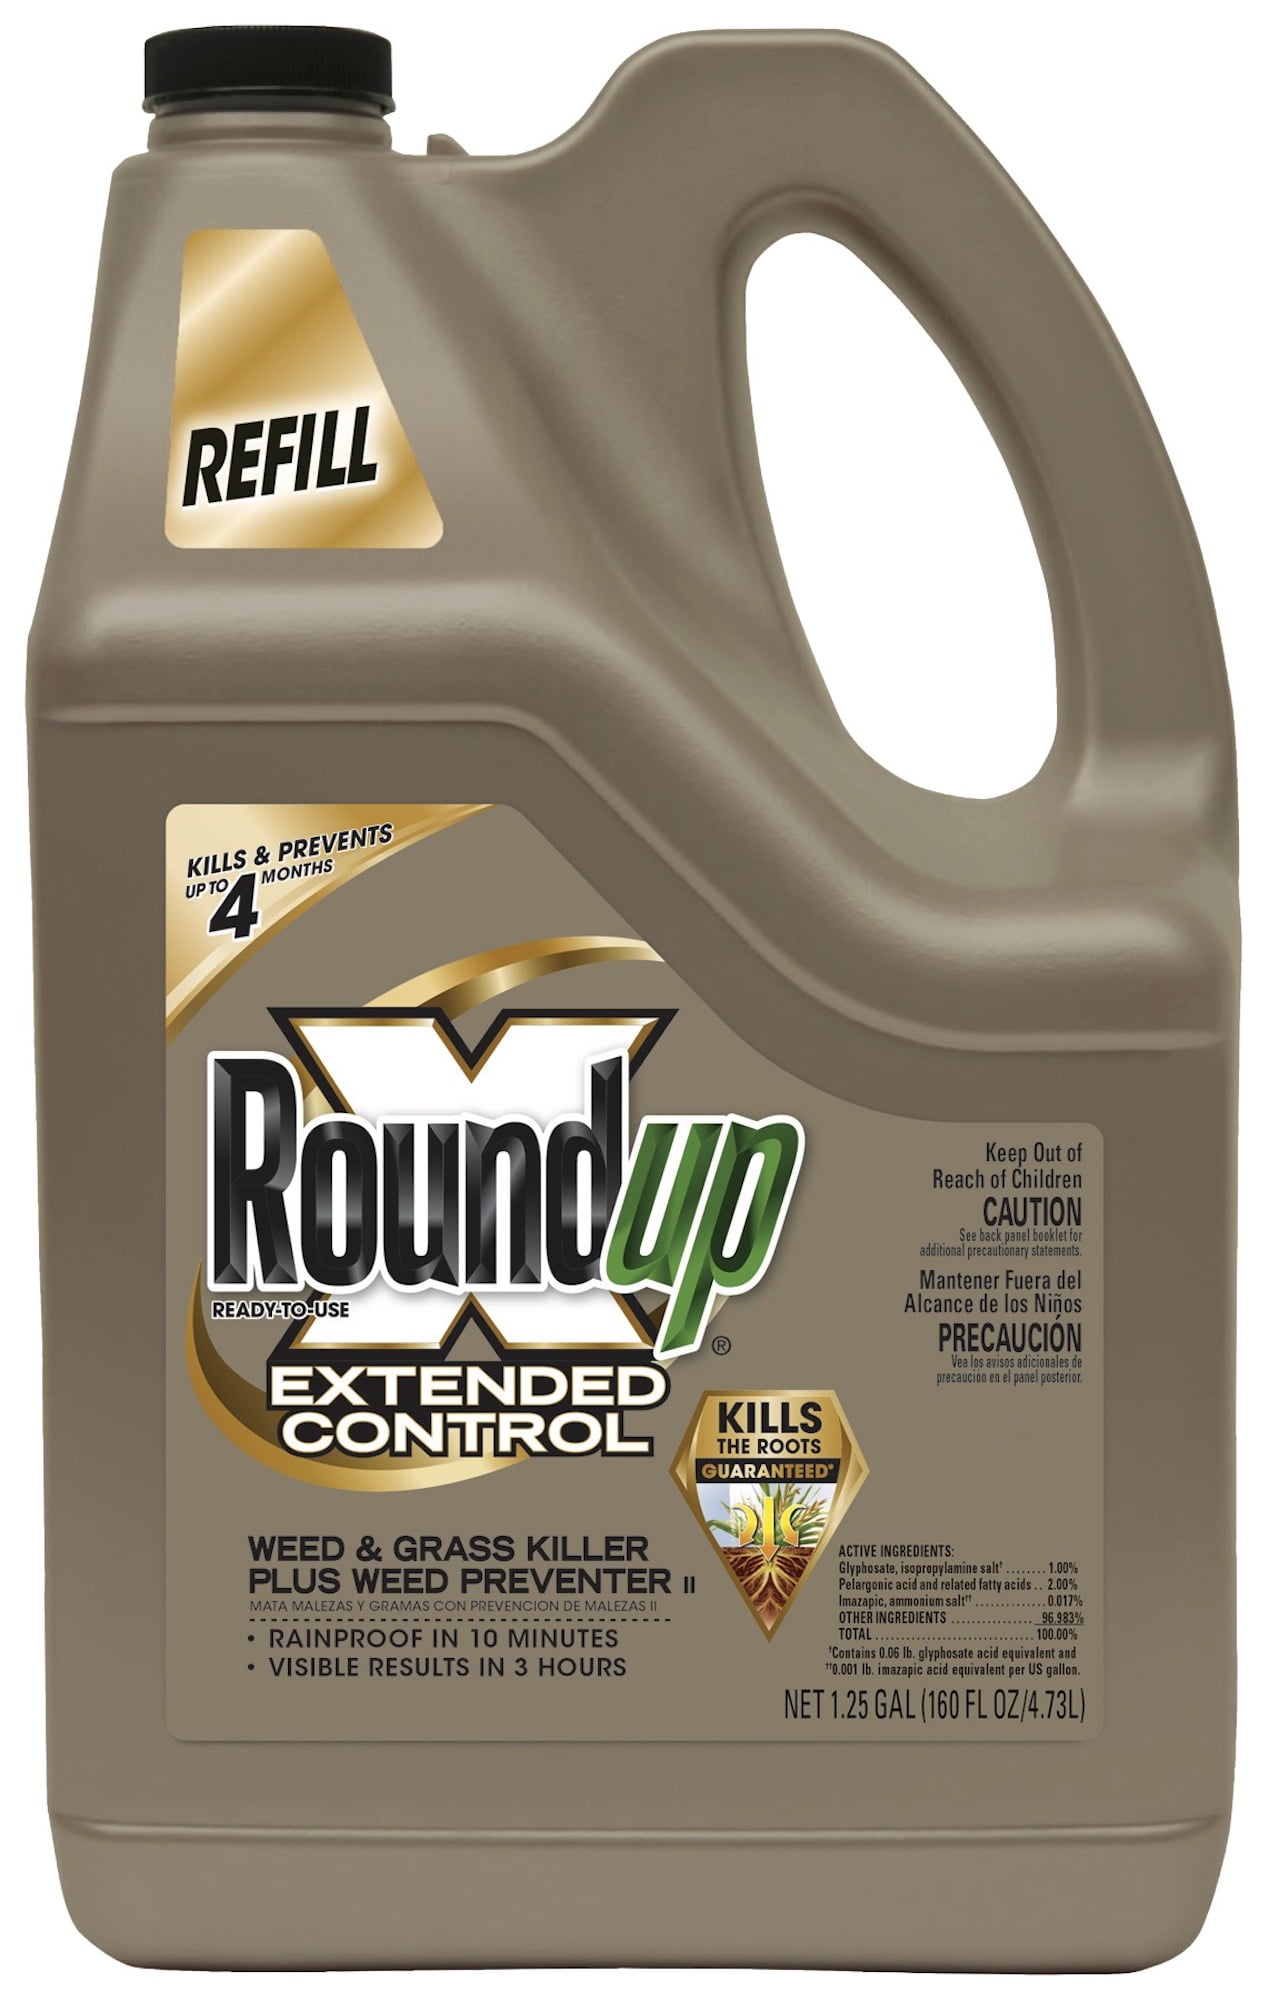 Roundup Ready-To-Use Extended Control Weed & Grass Killer Plus Weed Preventer II Refill, 1.25 gal.